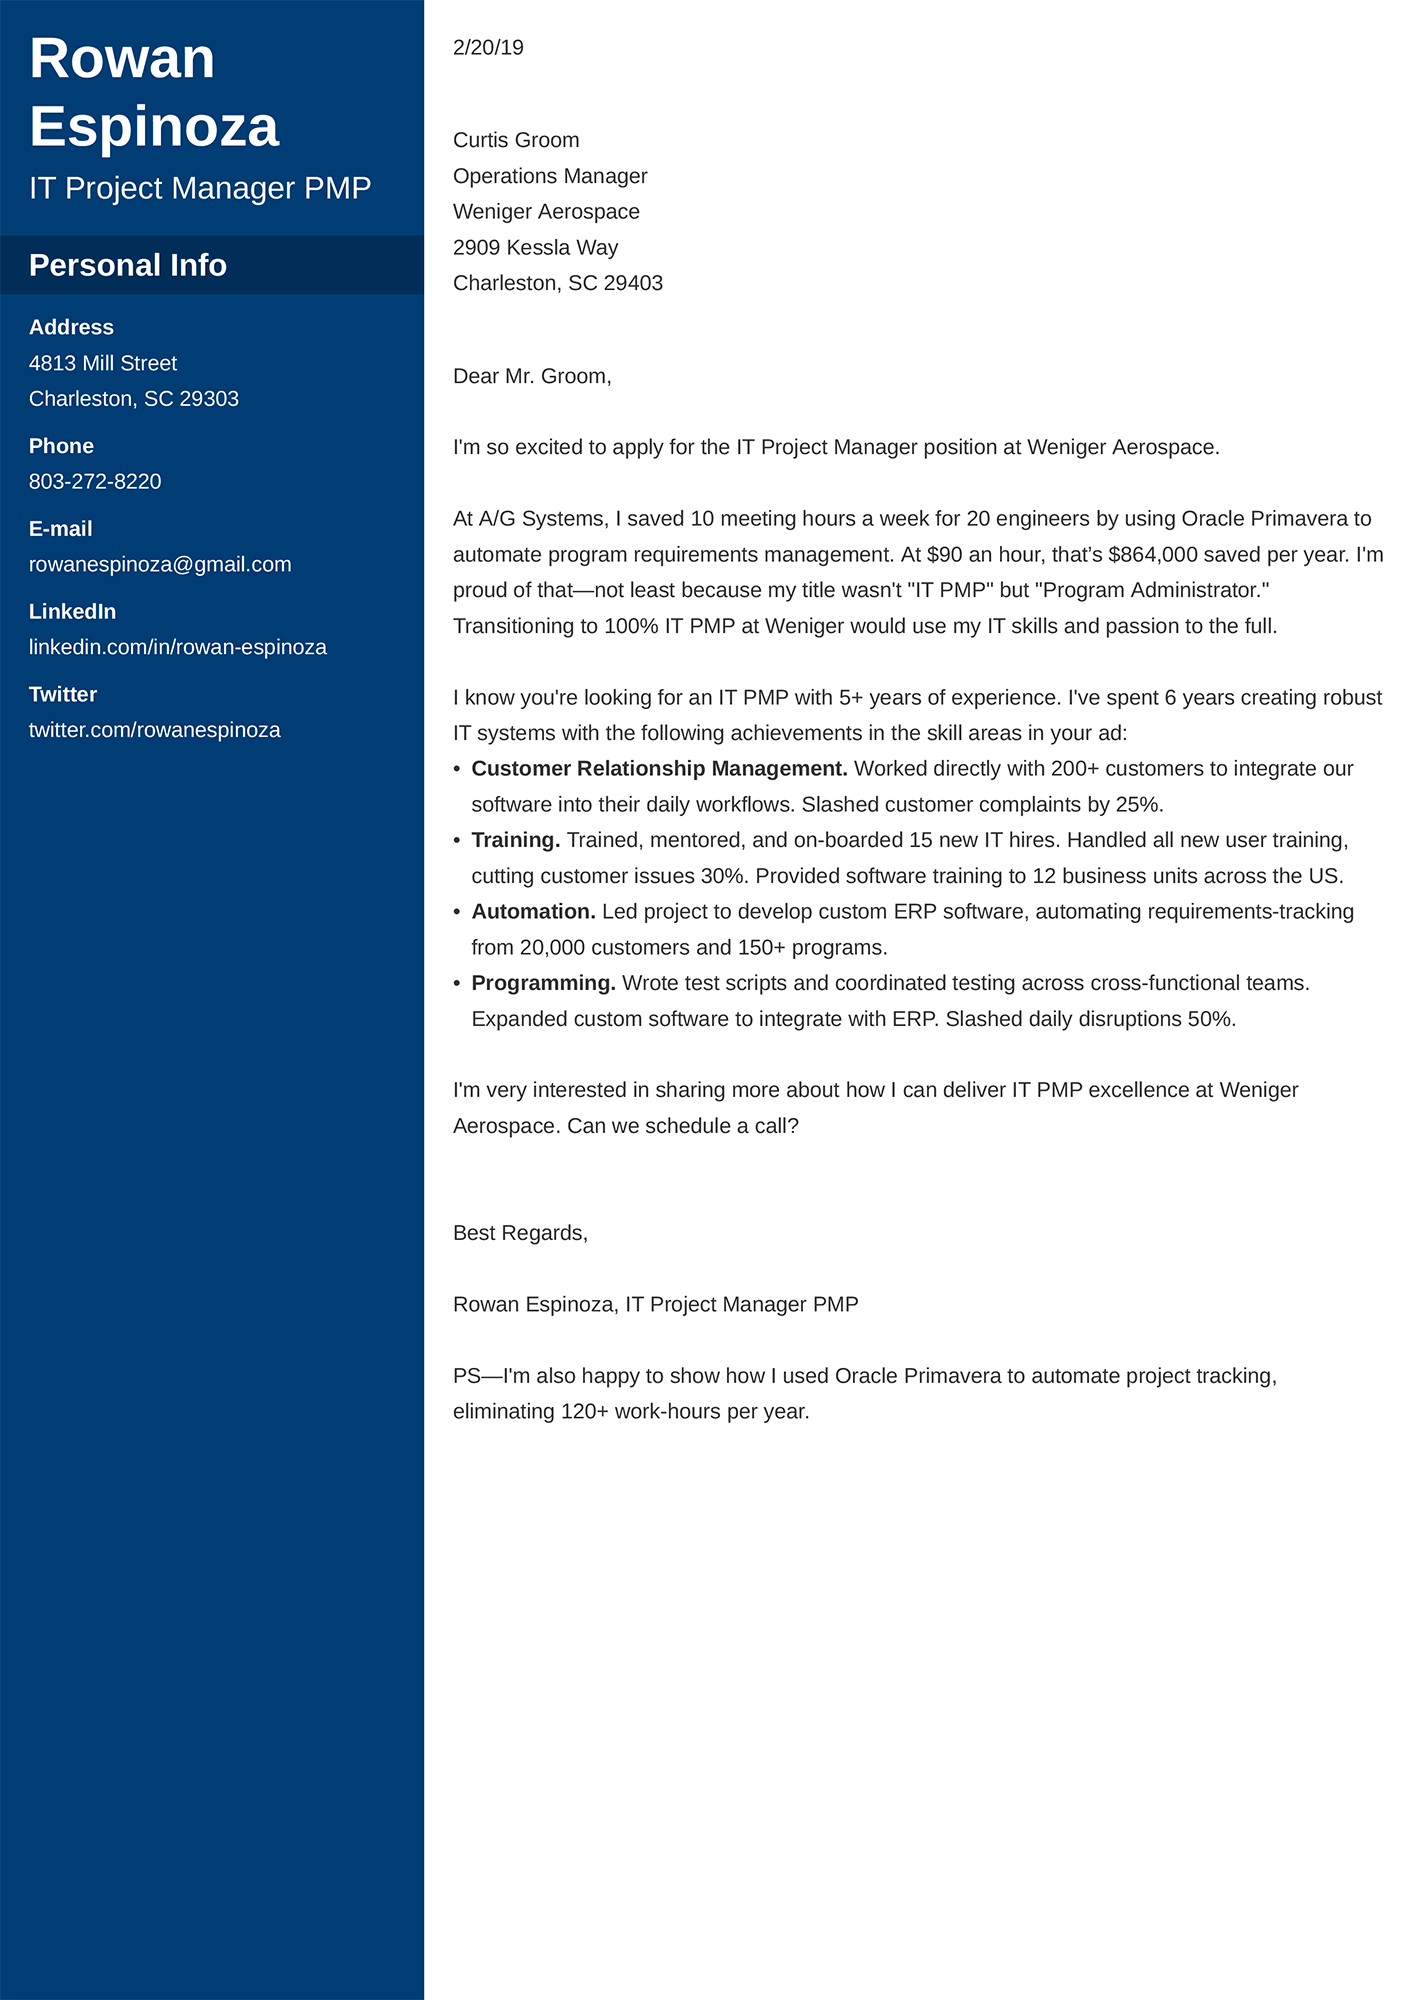 Environmental Scientist Cover Letter from cdn-images.zety.com